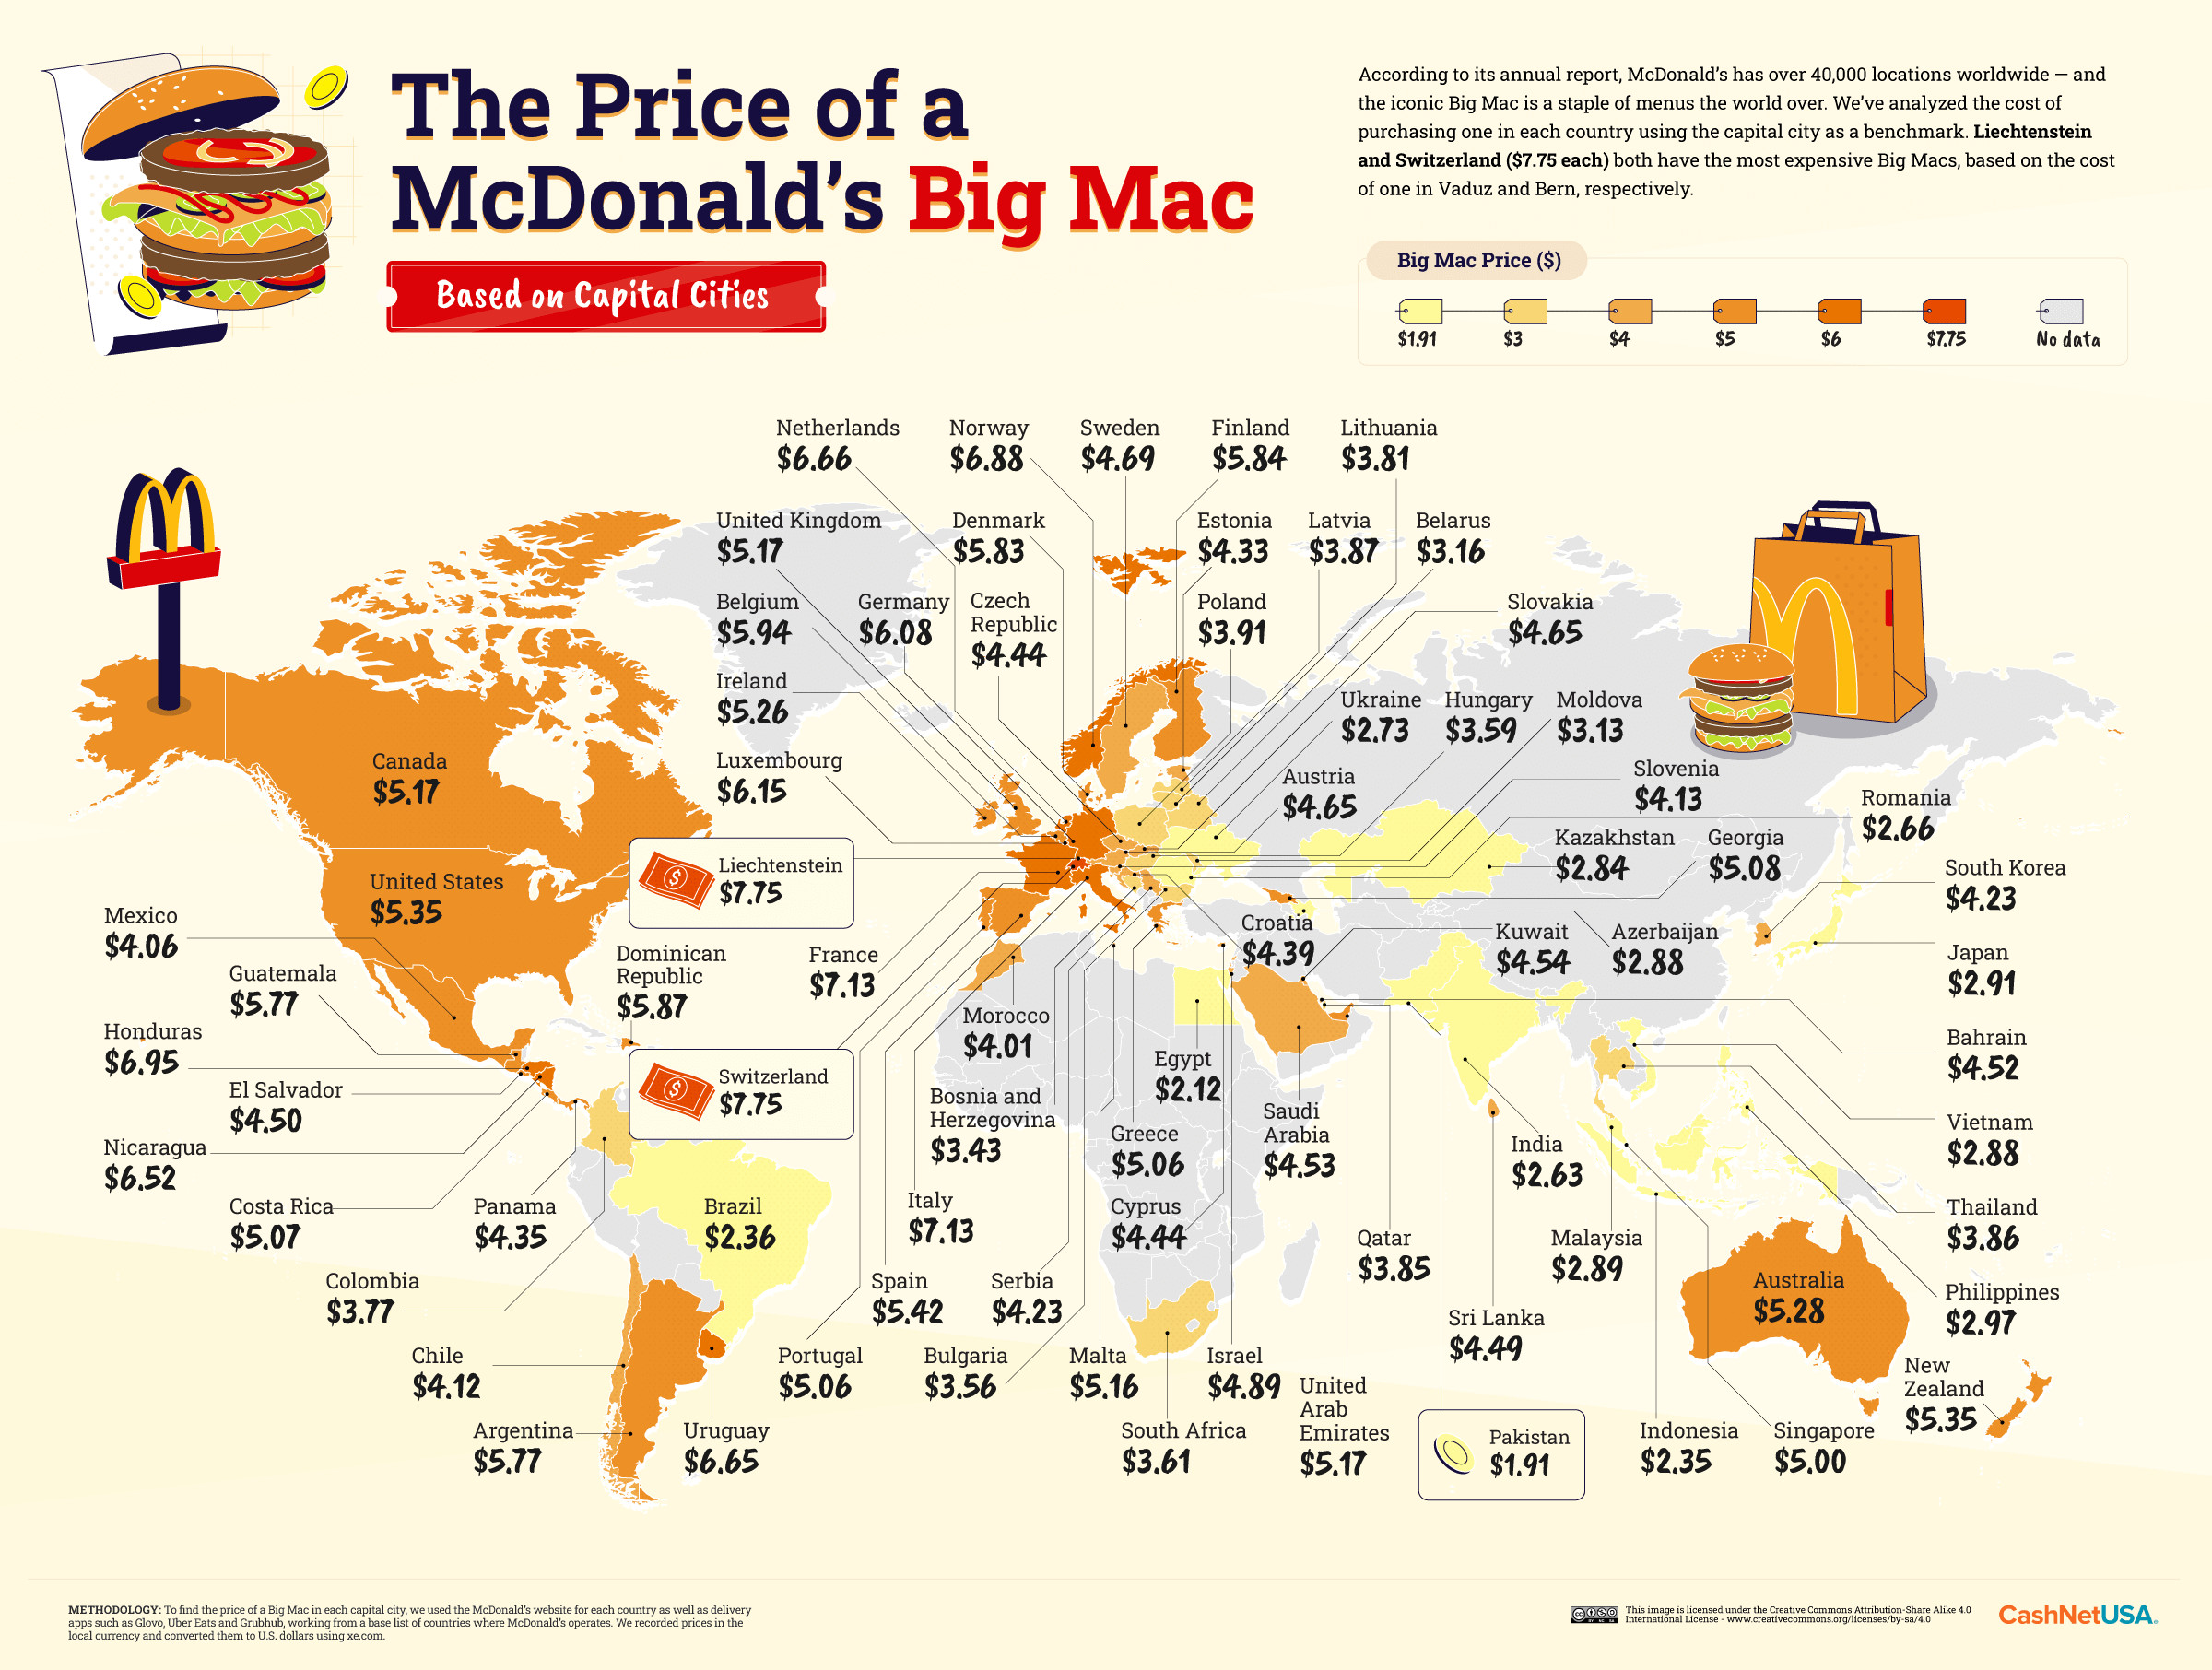 Here's How Much a Big Mac Costs Around the World